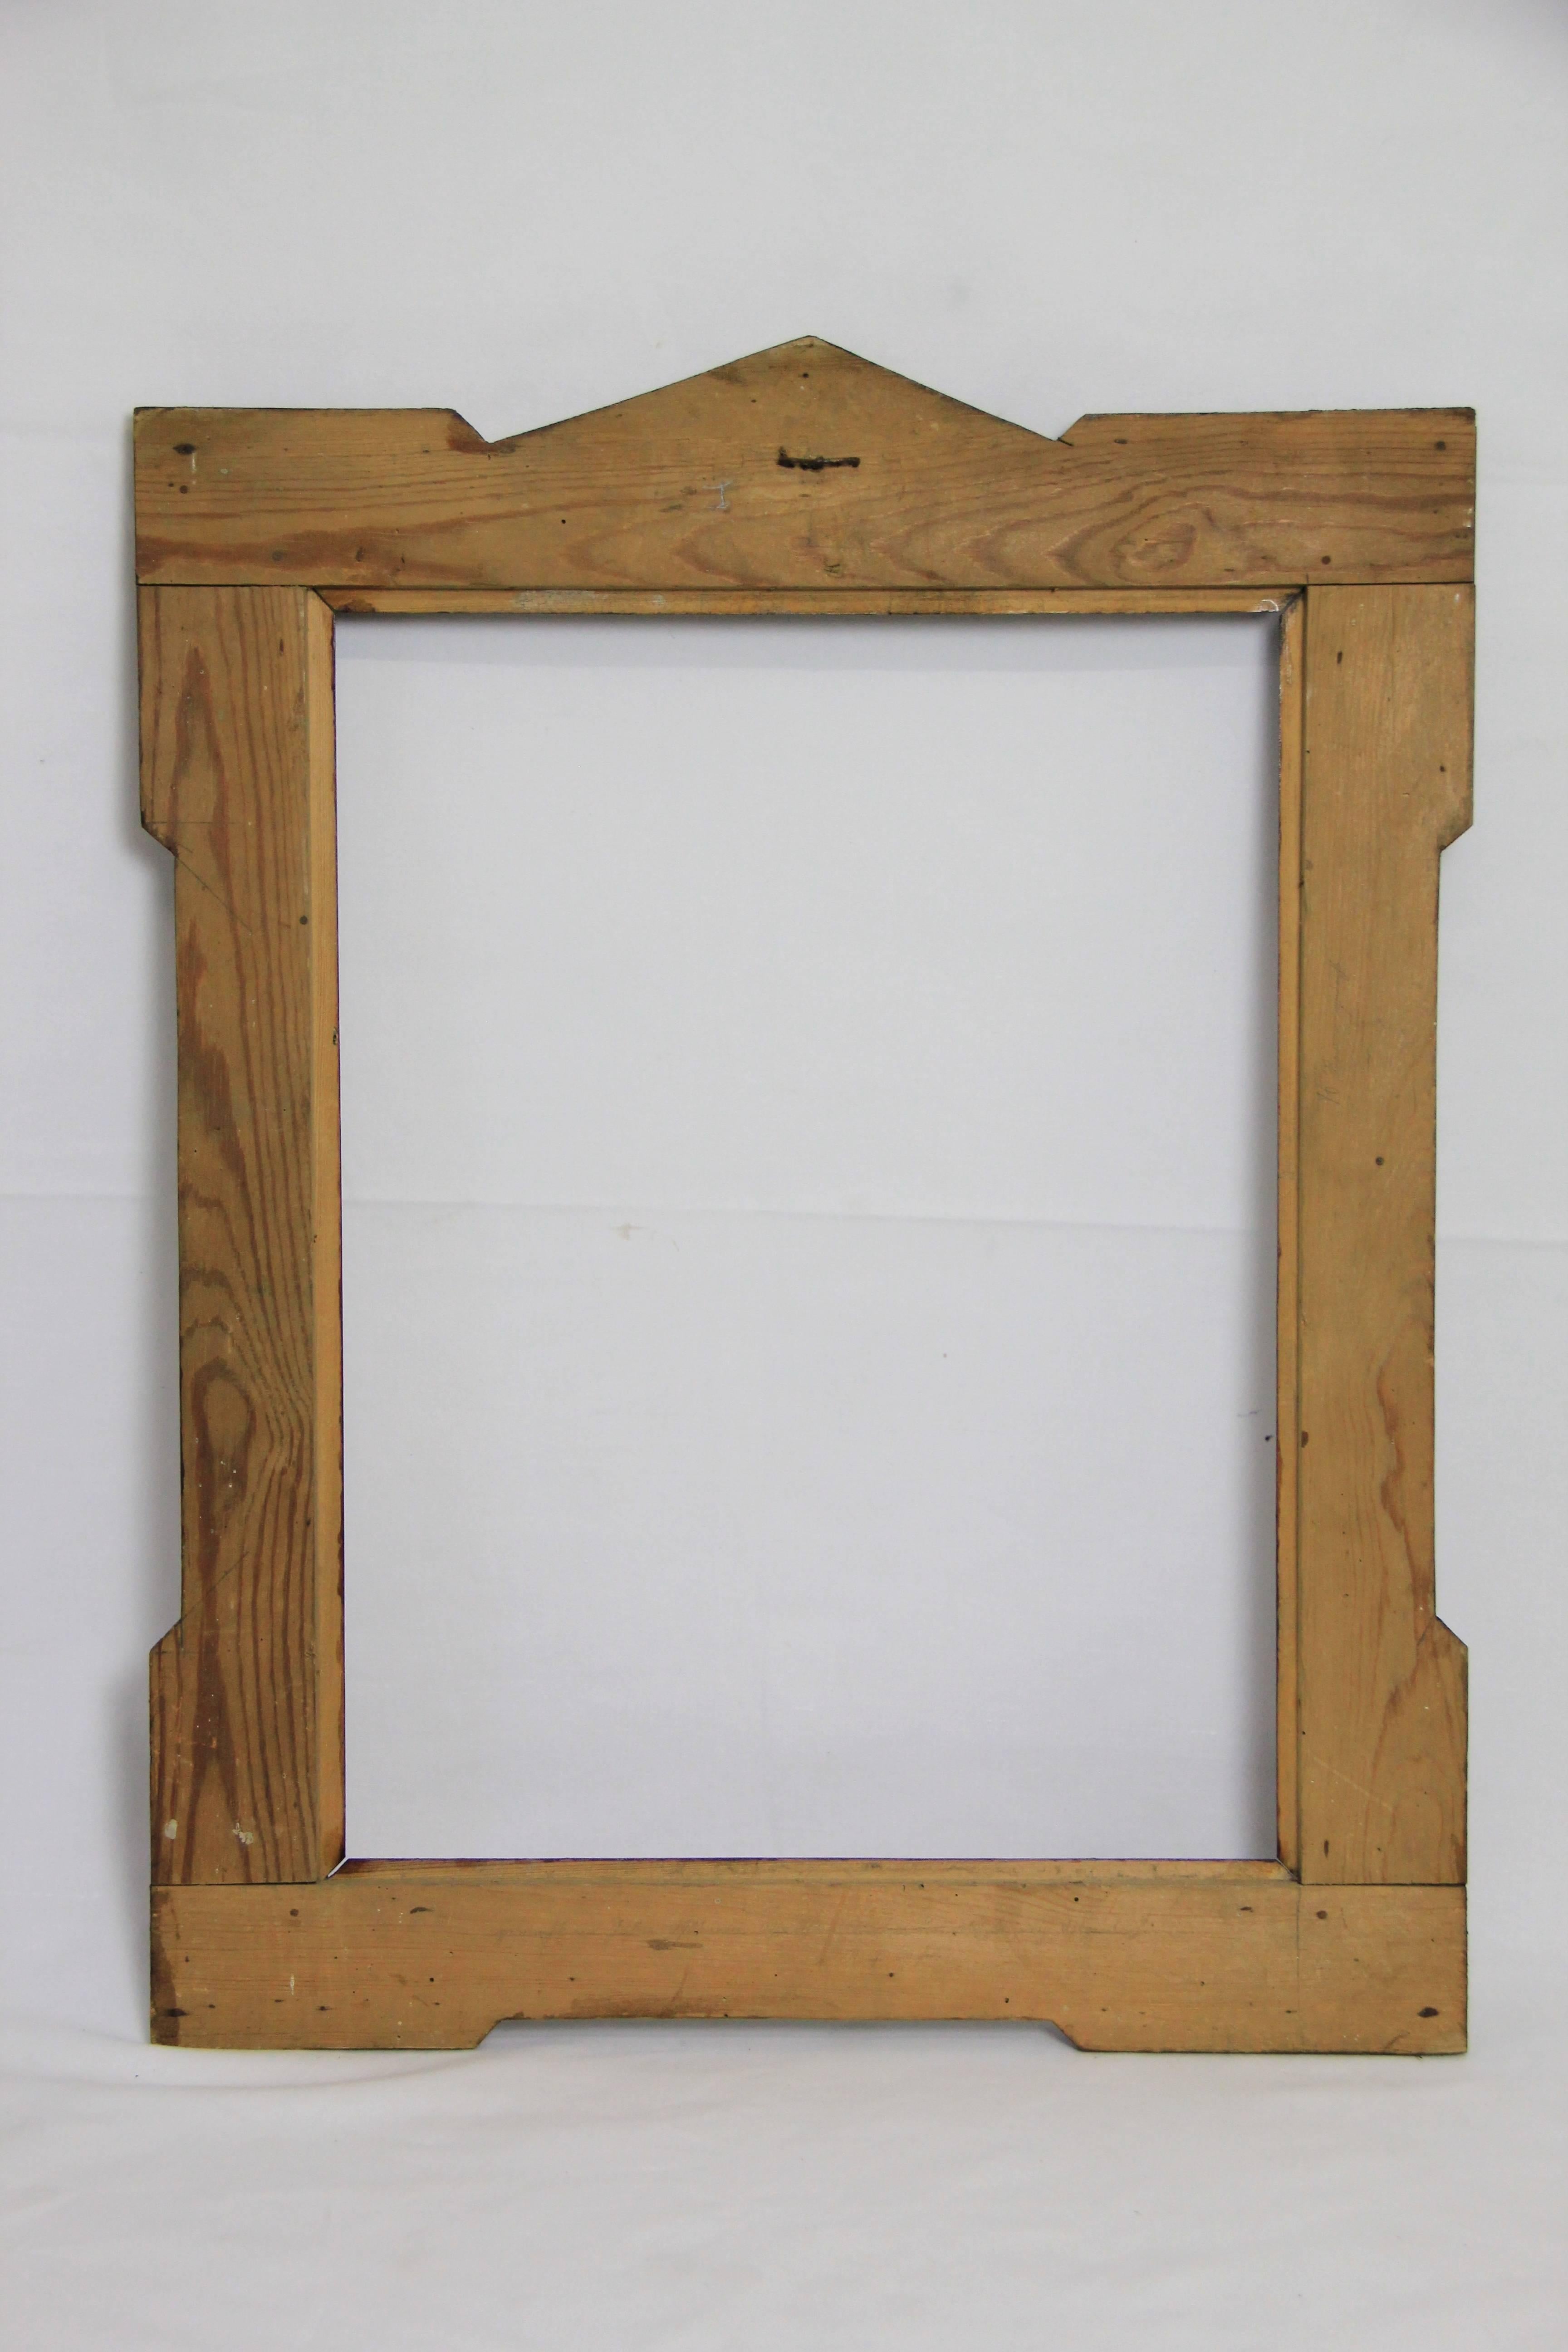 20th Century Hand-Carved Tramp Art Frame from Austria, circa 1900